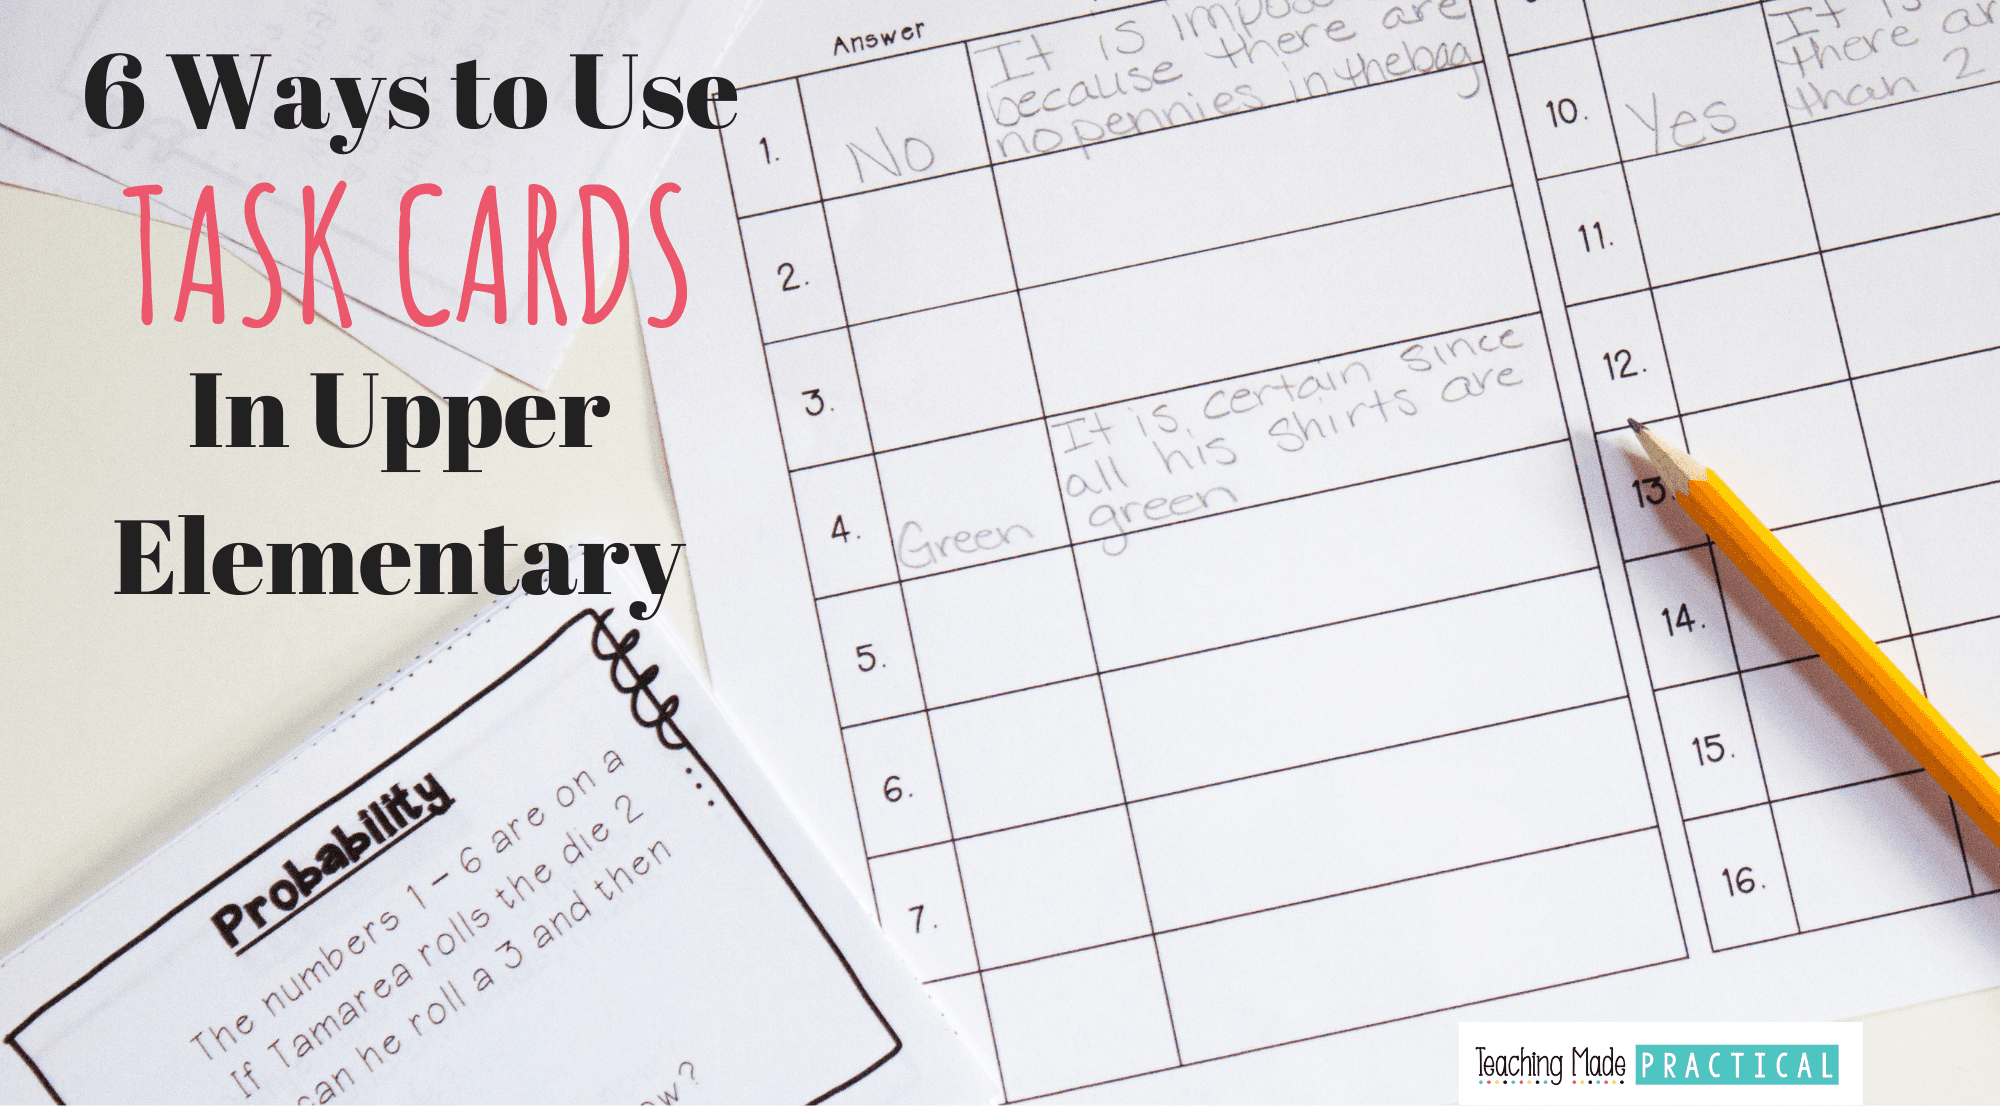 ideas and tips for using task cards in 3rd, 4th, and 5th grade classrooms